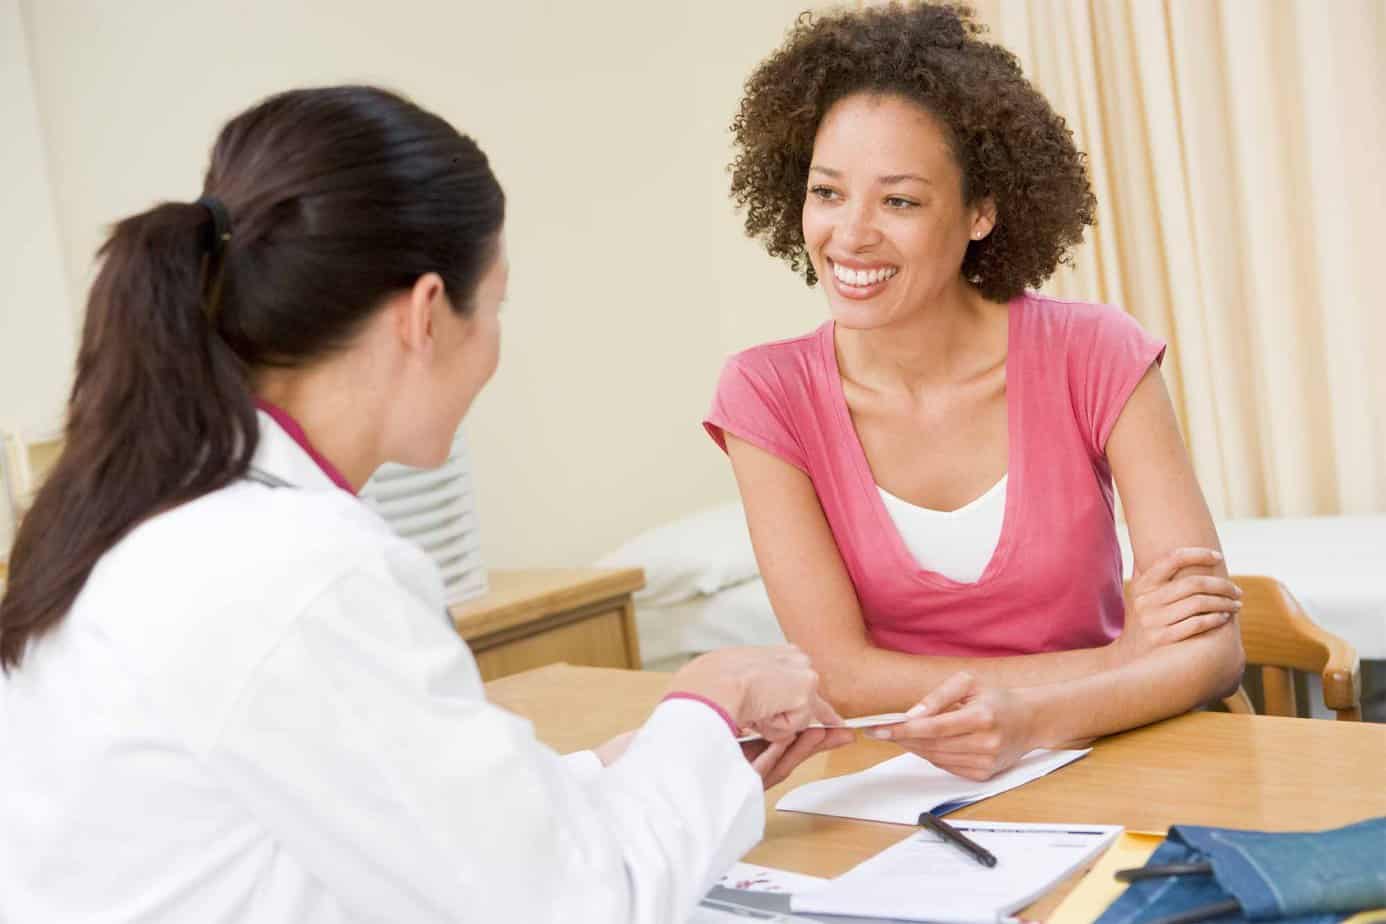 What You Should Ask Your Doctor Before Filling Painkiller Prescription